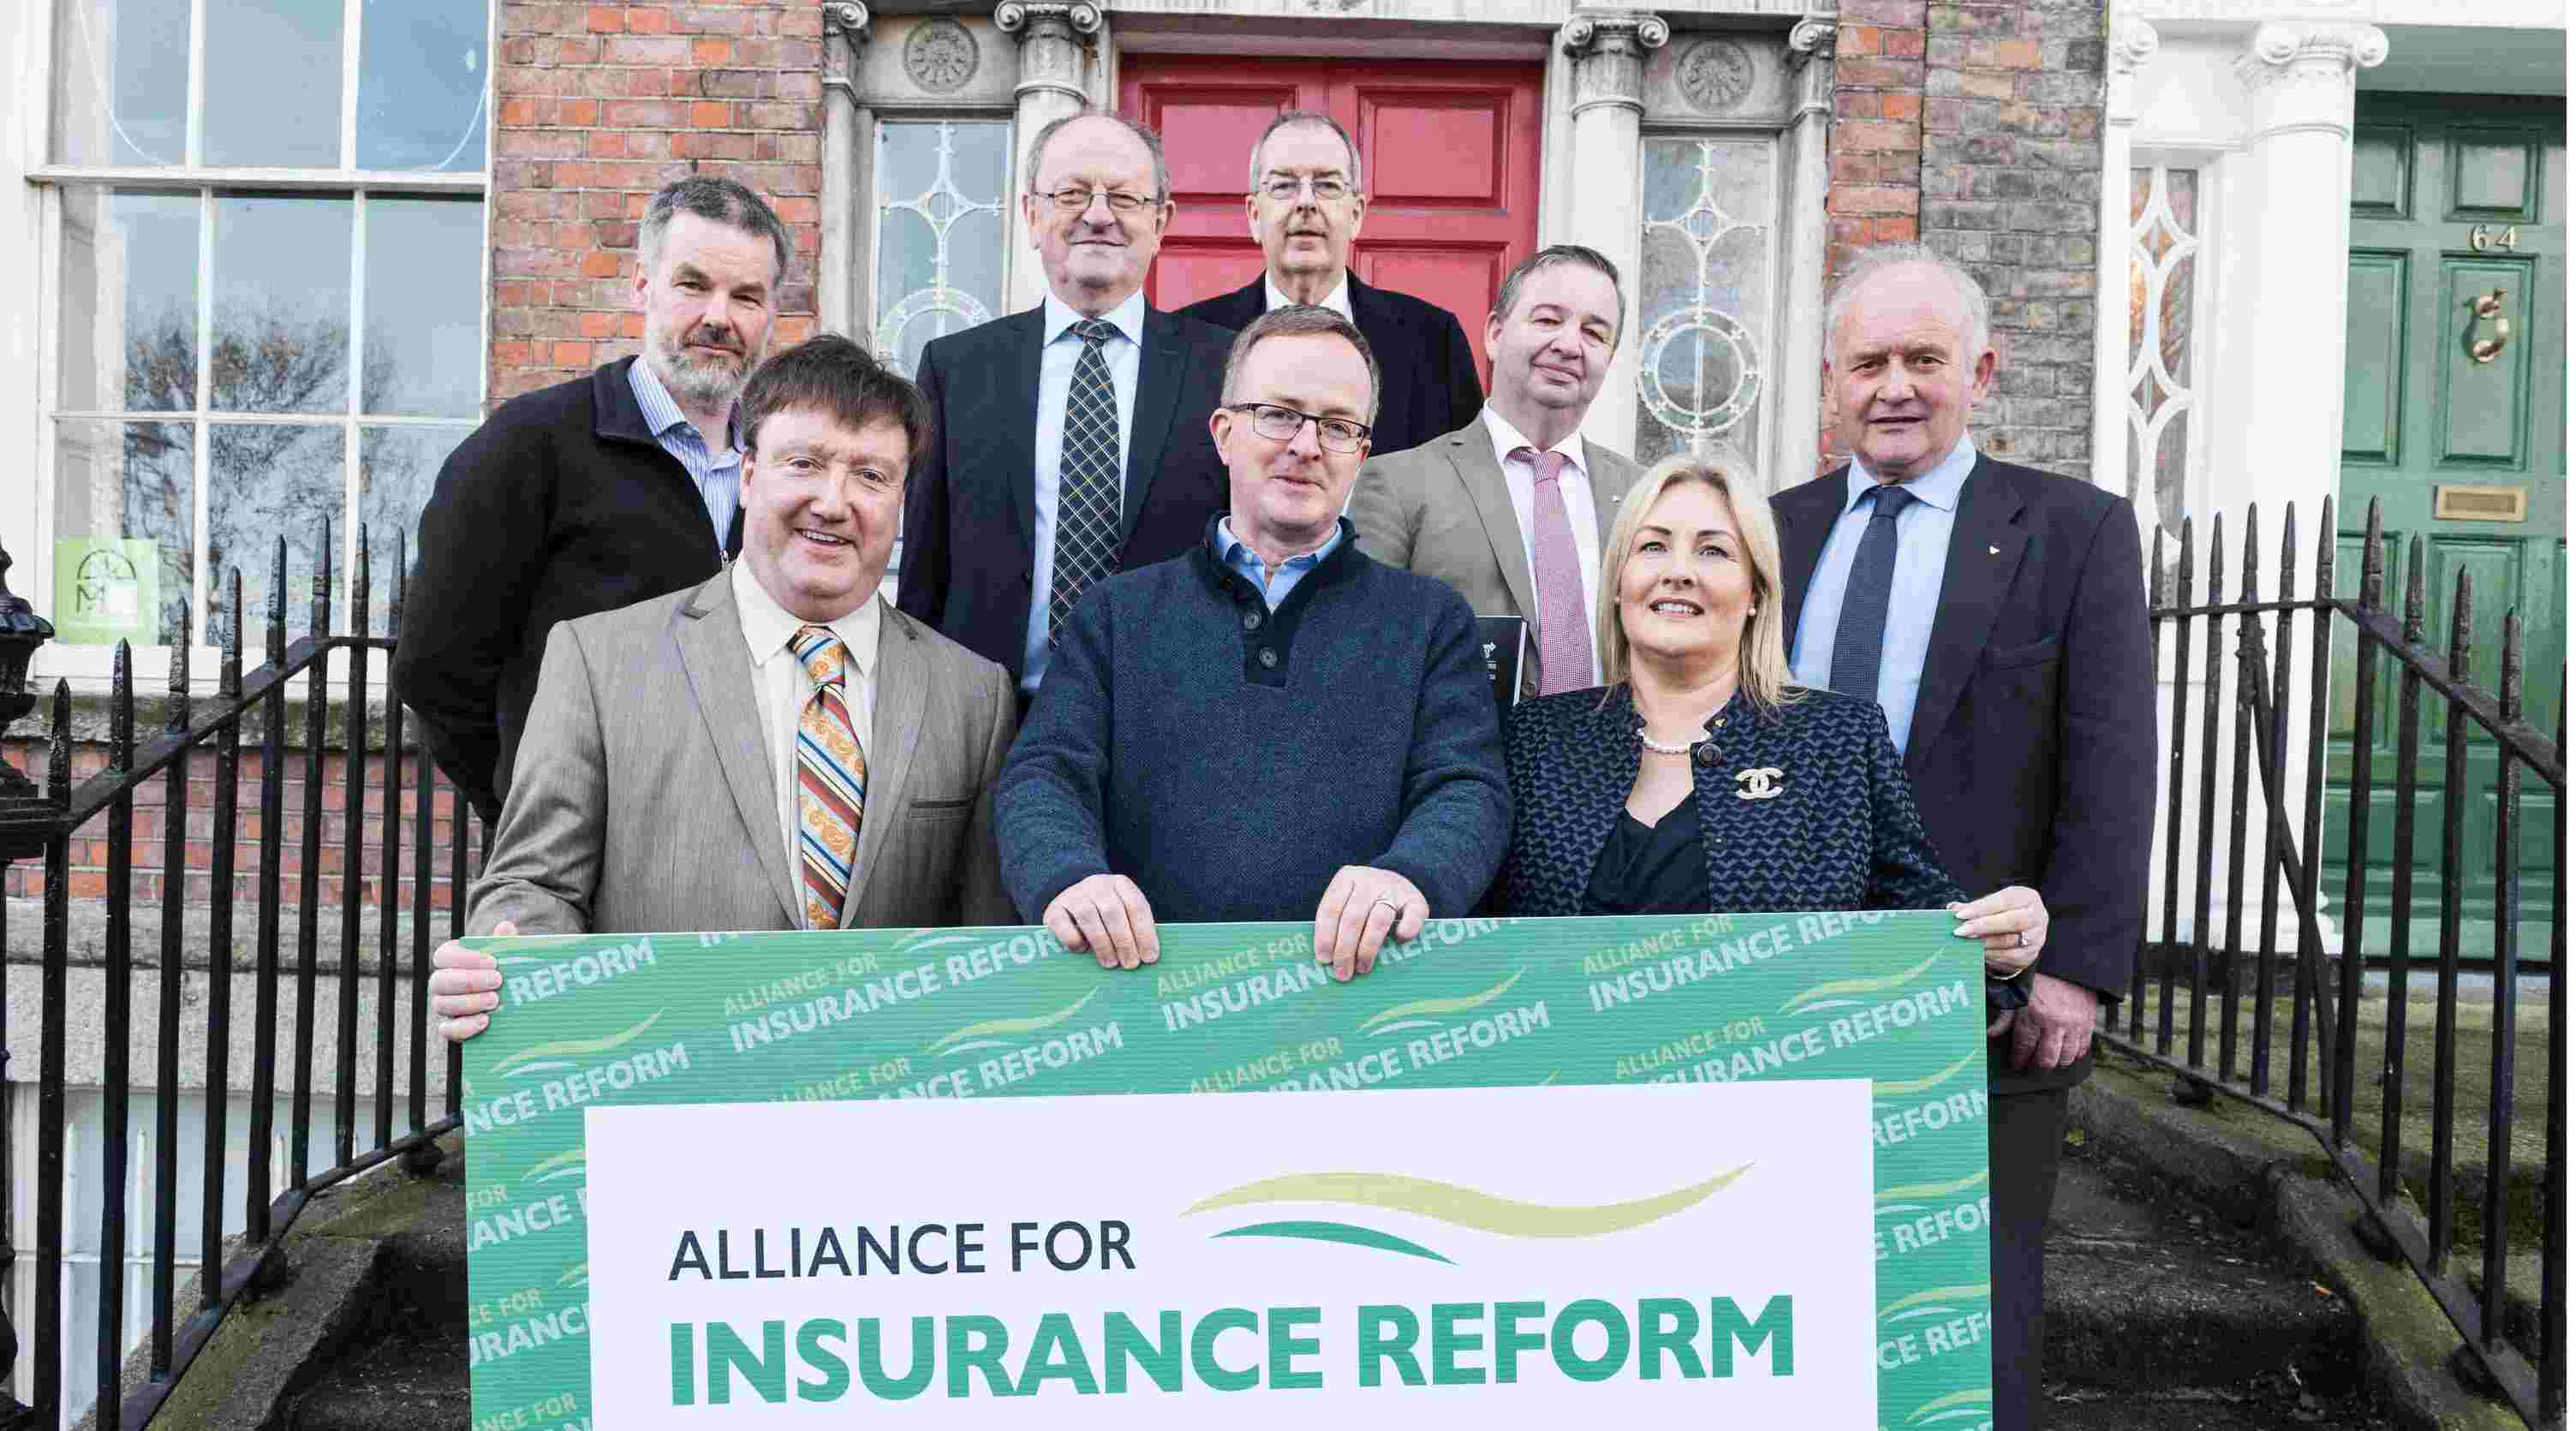 At the launch of the Alliance for Insurance Reform were (back row from left): Eoin McCambridge, Incoming VFI President Padraic McGann, VFI Chief Executive Padraig Cribben, the Irish Road Haulage Association’s Ger Hyland and Pat O'Donovan. Front row (from left): AOIFE’s Colm Croffy, Peter Boland and the Irish Road Haulage Association’s Verona Murphy.